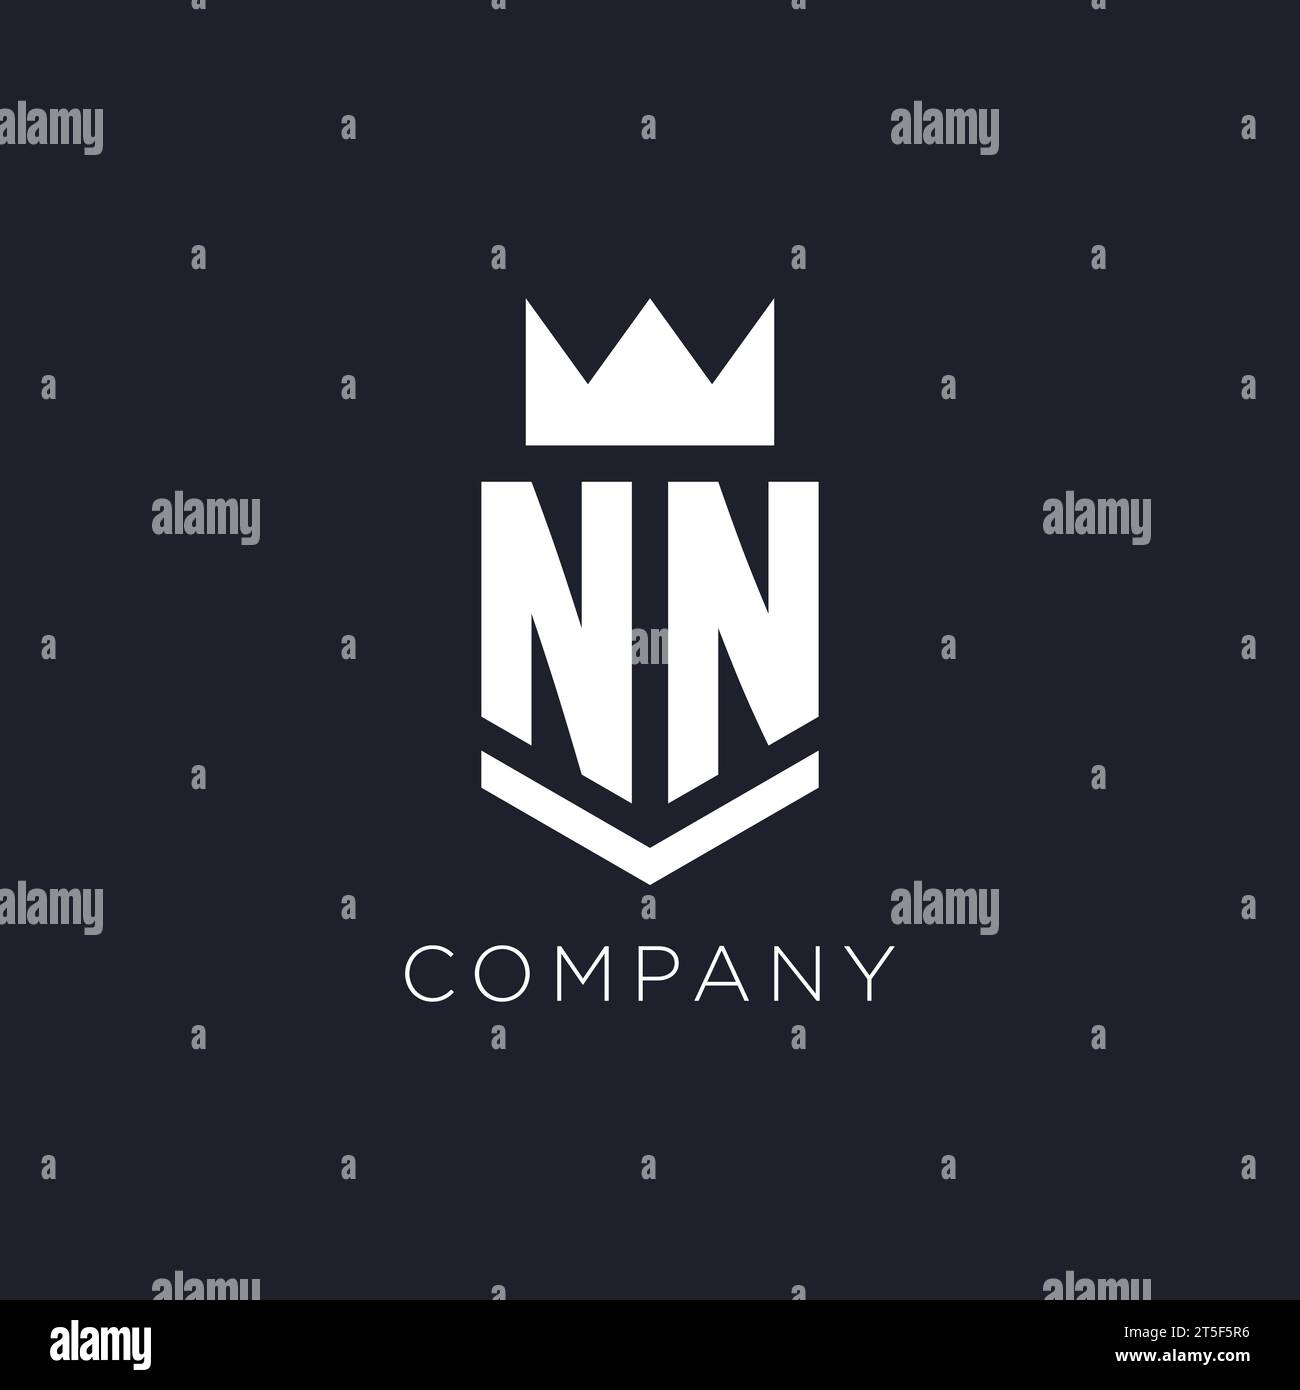 NN logo with shield and crown, initial monogram logo design ideas Stock Vector